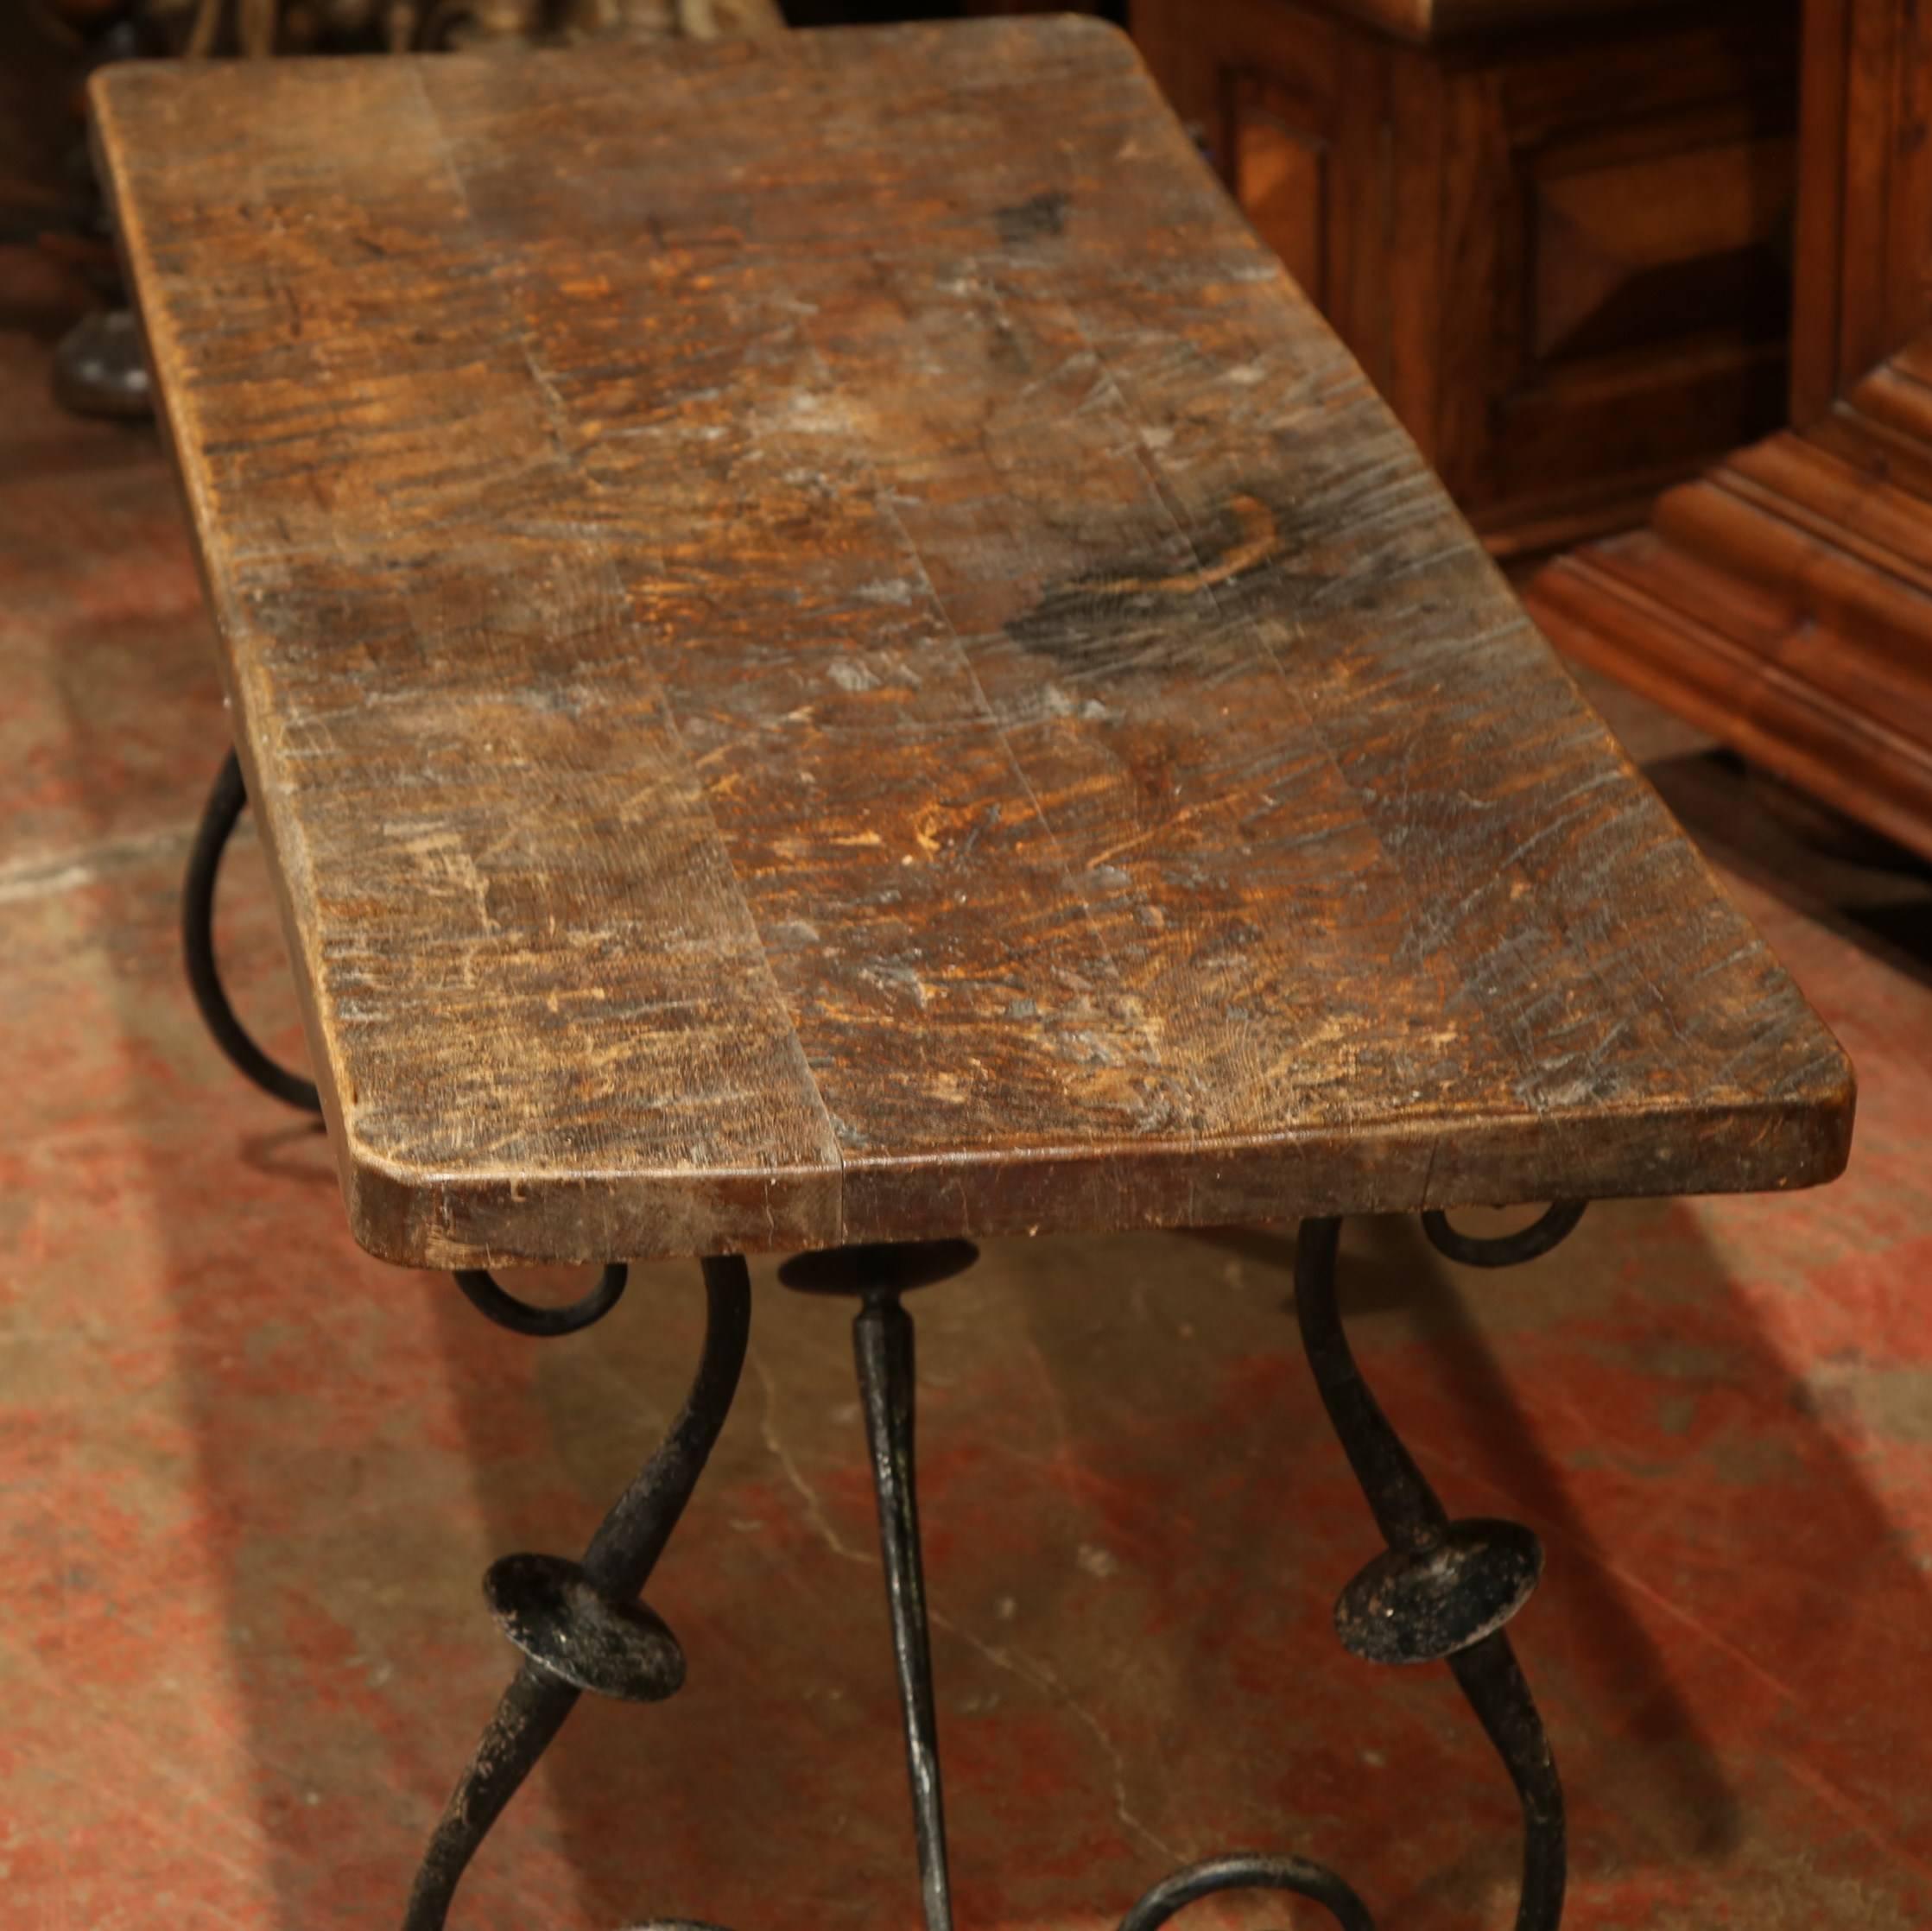 This elegant, antique coffee table was created in Spain, circa 1890. The table features a wooden, walnut tabletop, and scrolled, iron legs connected with an iron stretcher. The top is unique, hand-cut with a saw or ax from one piece of solid wood.